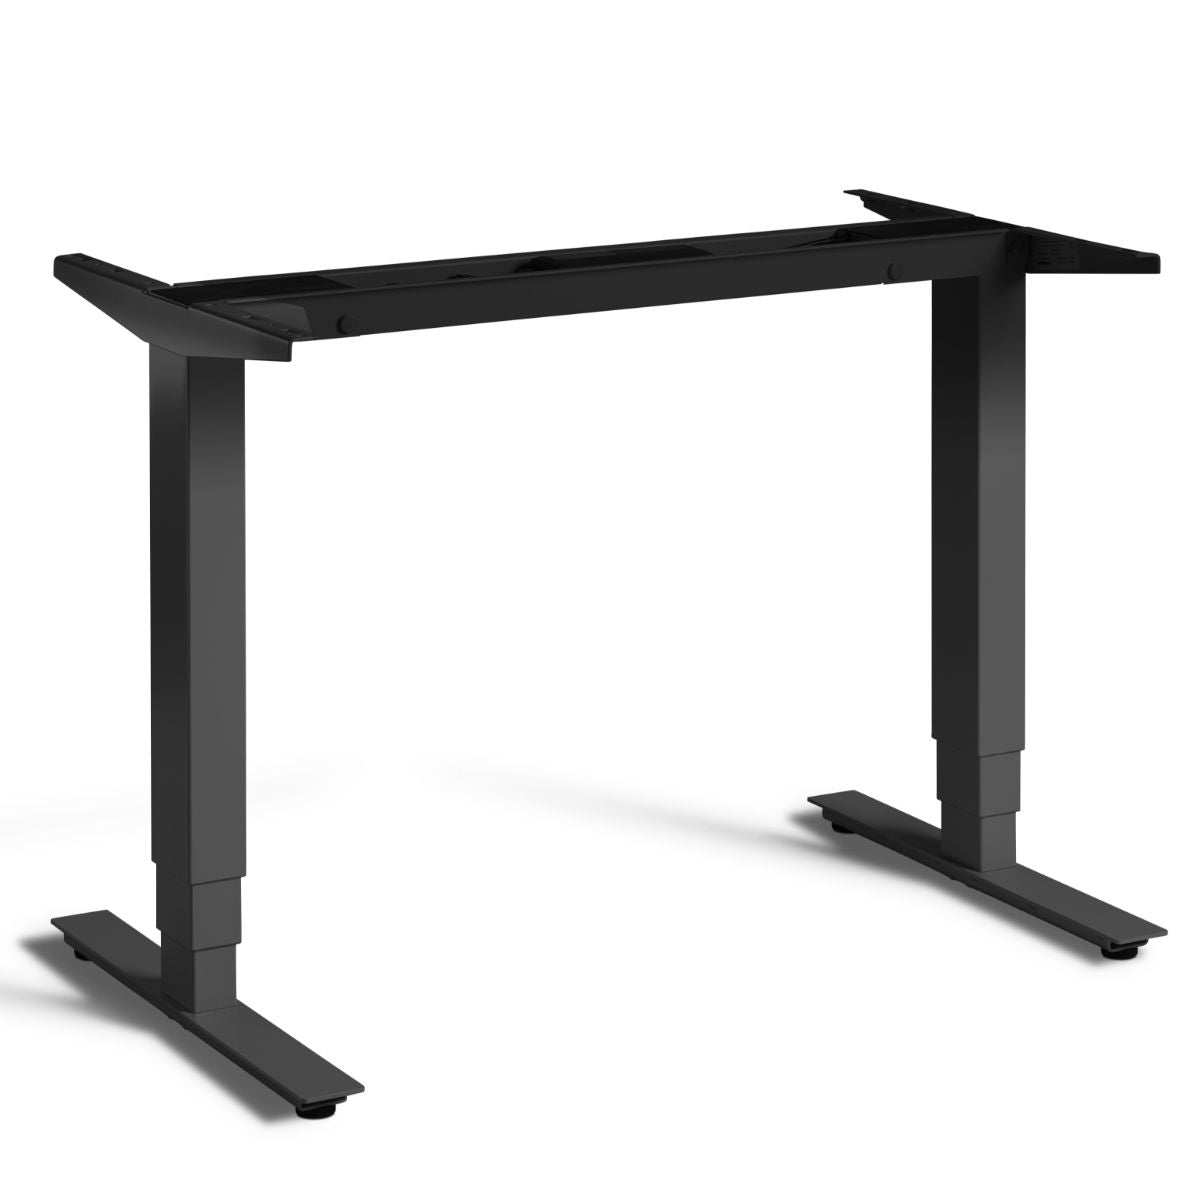 Pacto small standing desk frame in anthracite